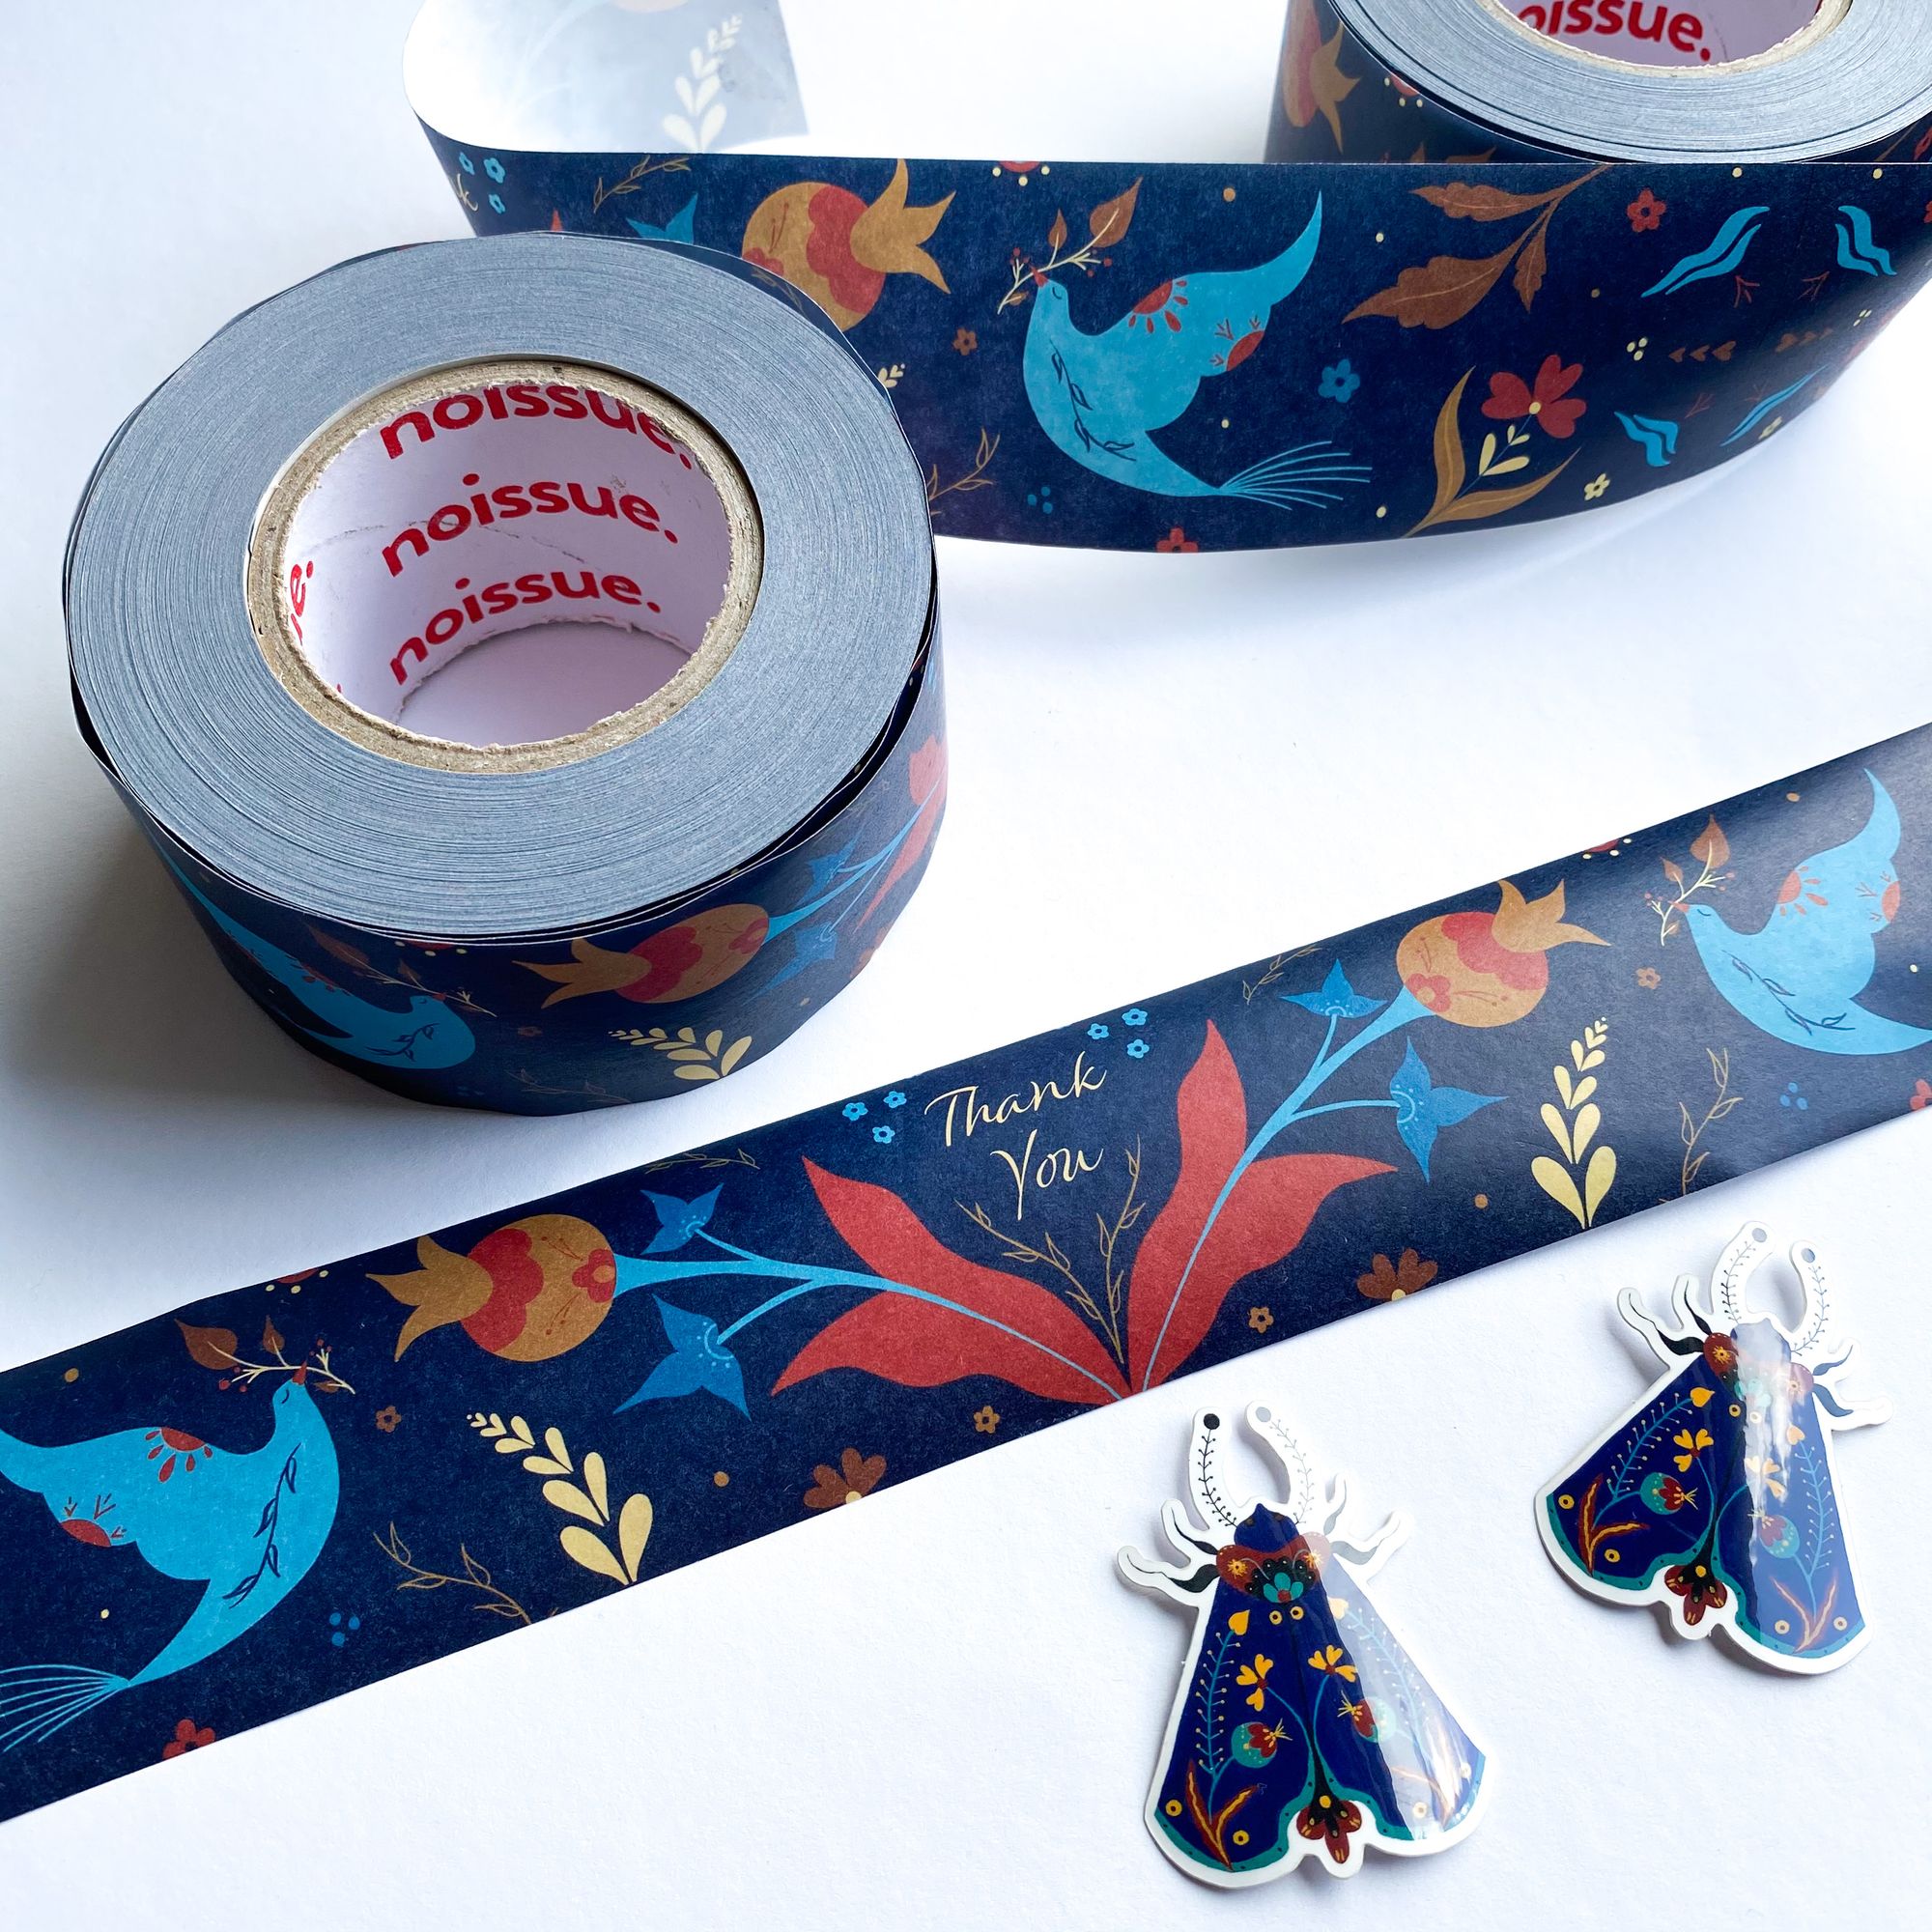 Cagla Zimmermann: Folk Art Wrapped in Playful and Sustainable Packaging